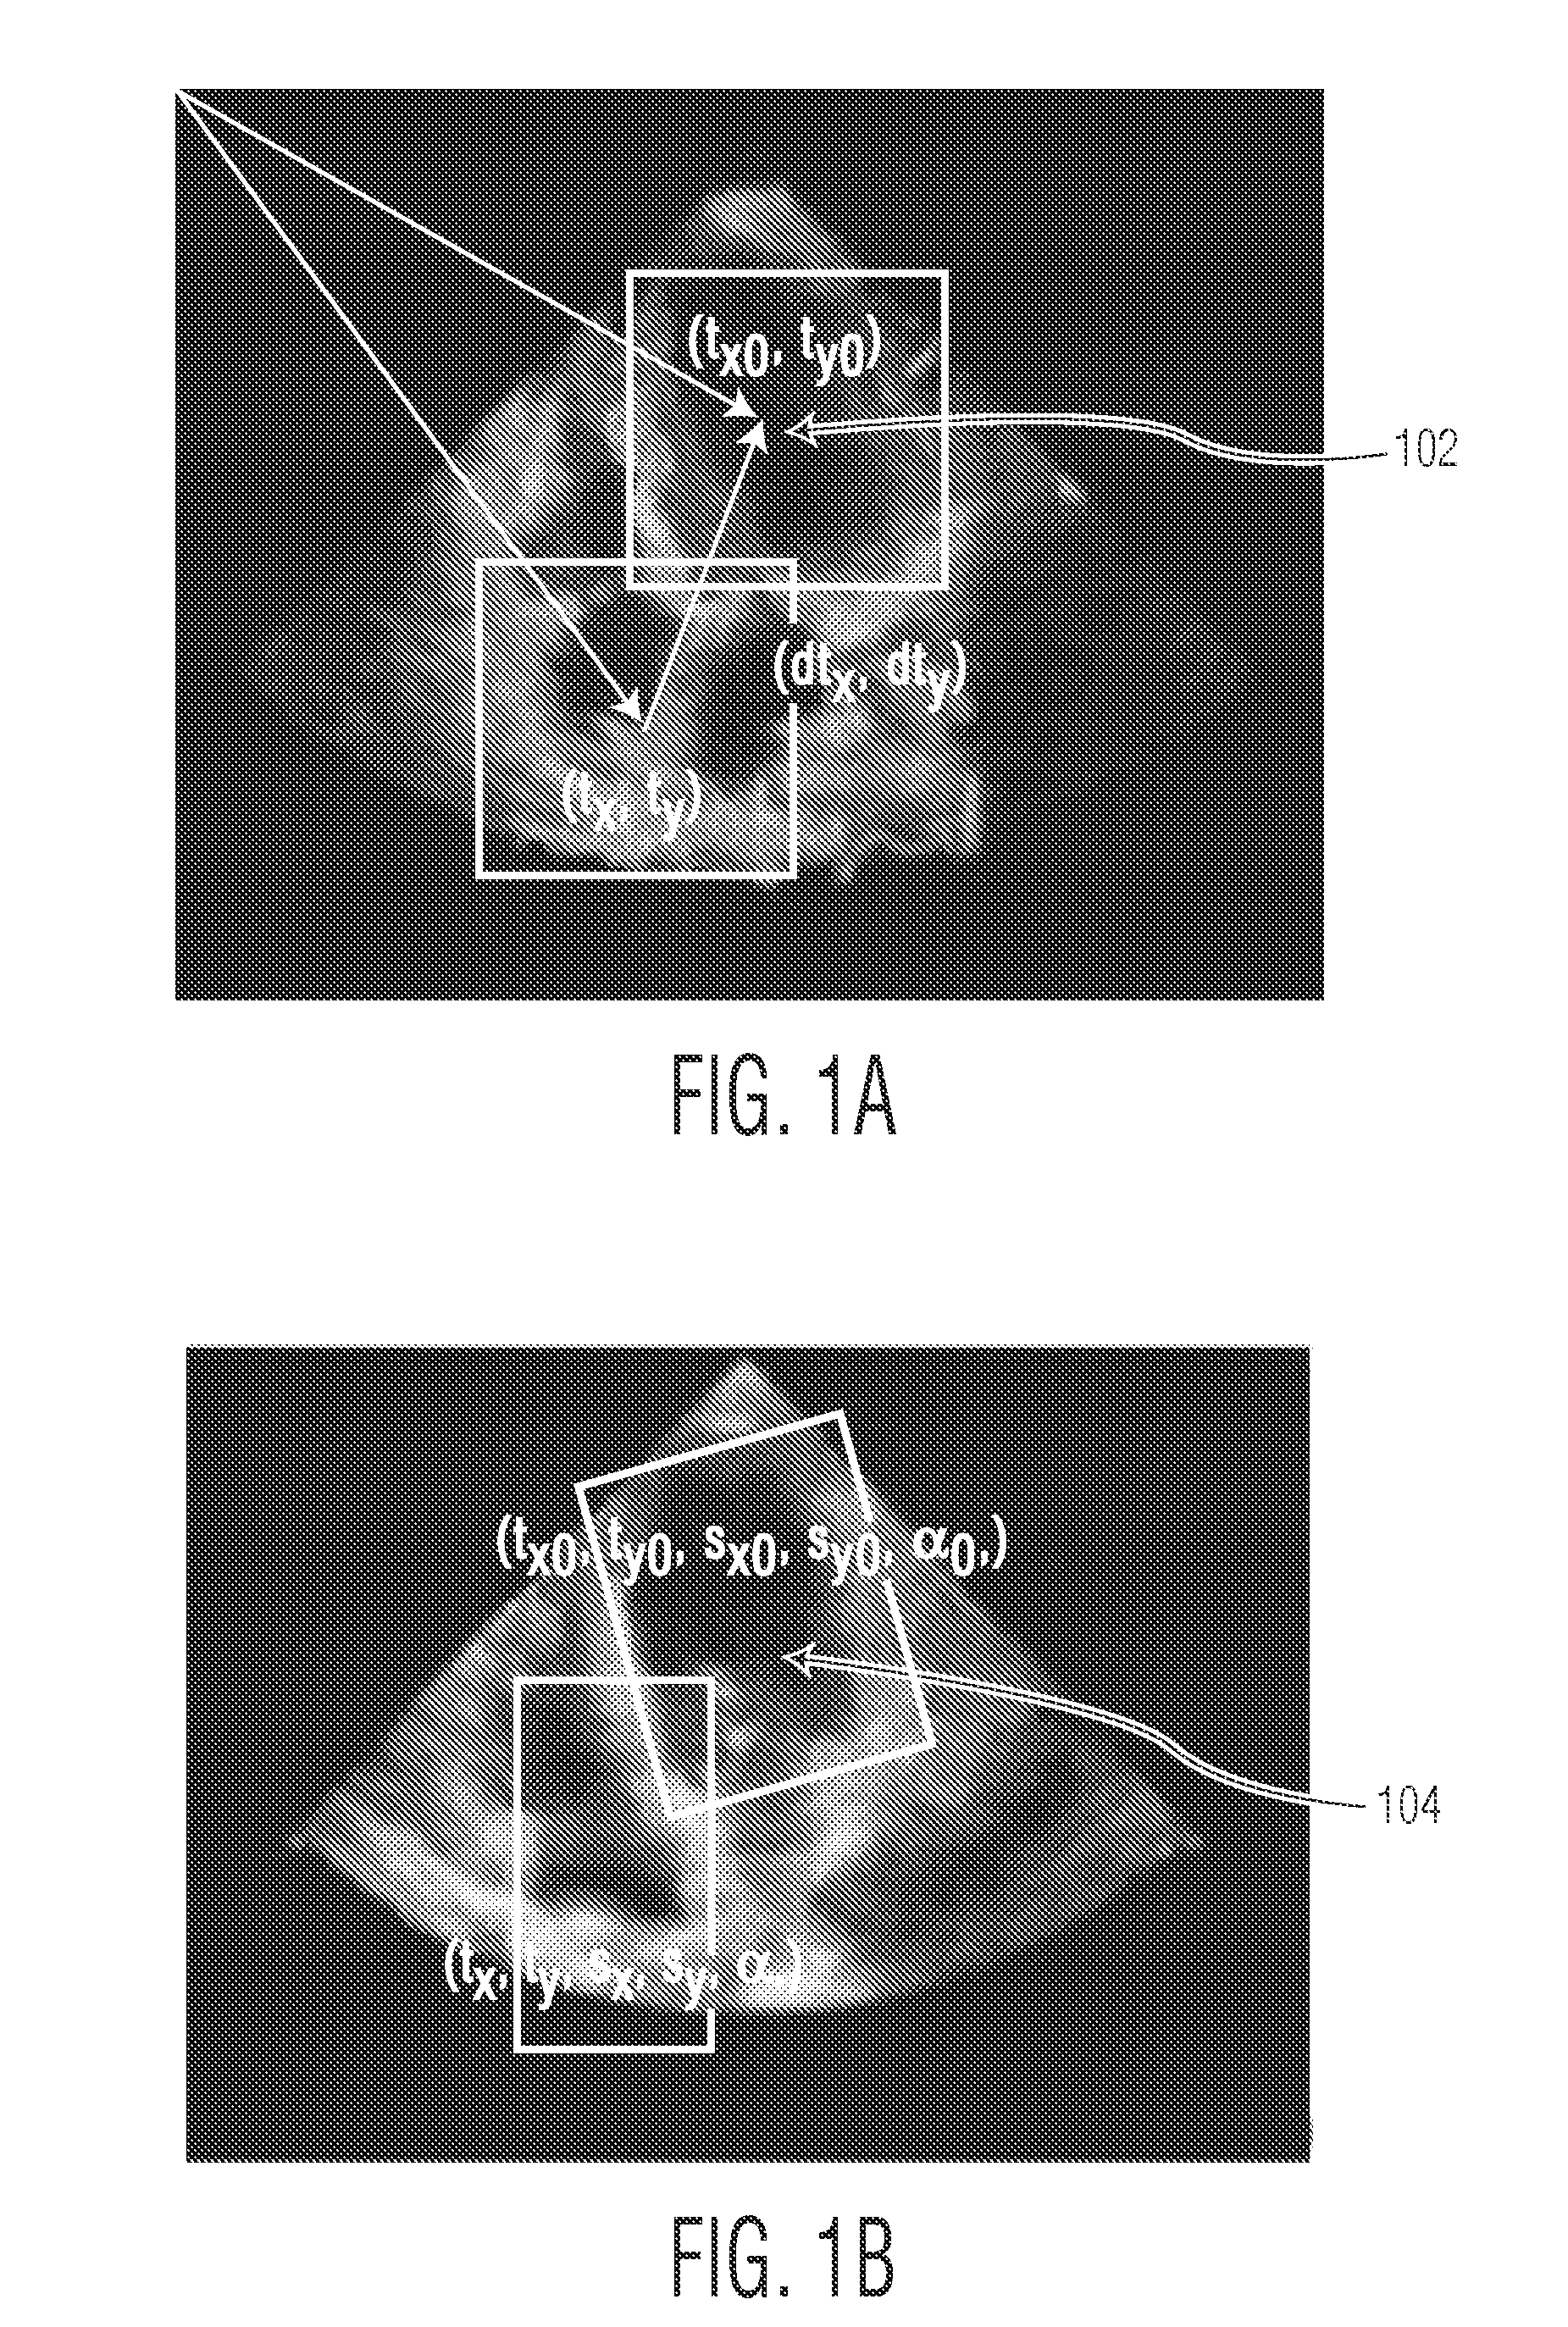 Method and System For Regression-Based Object Detection in Medical Images